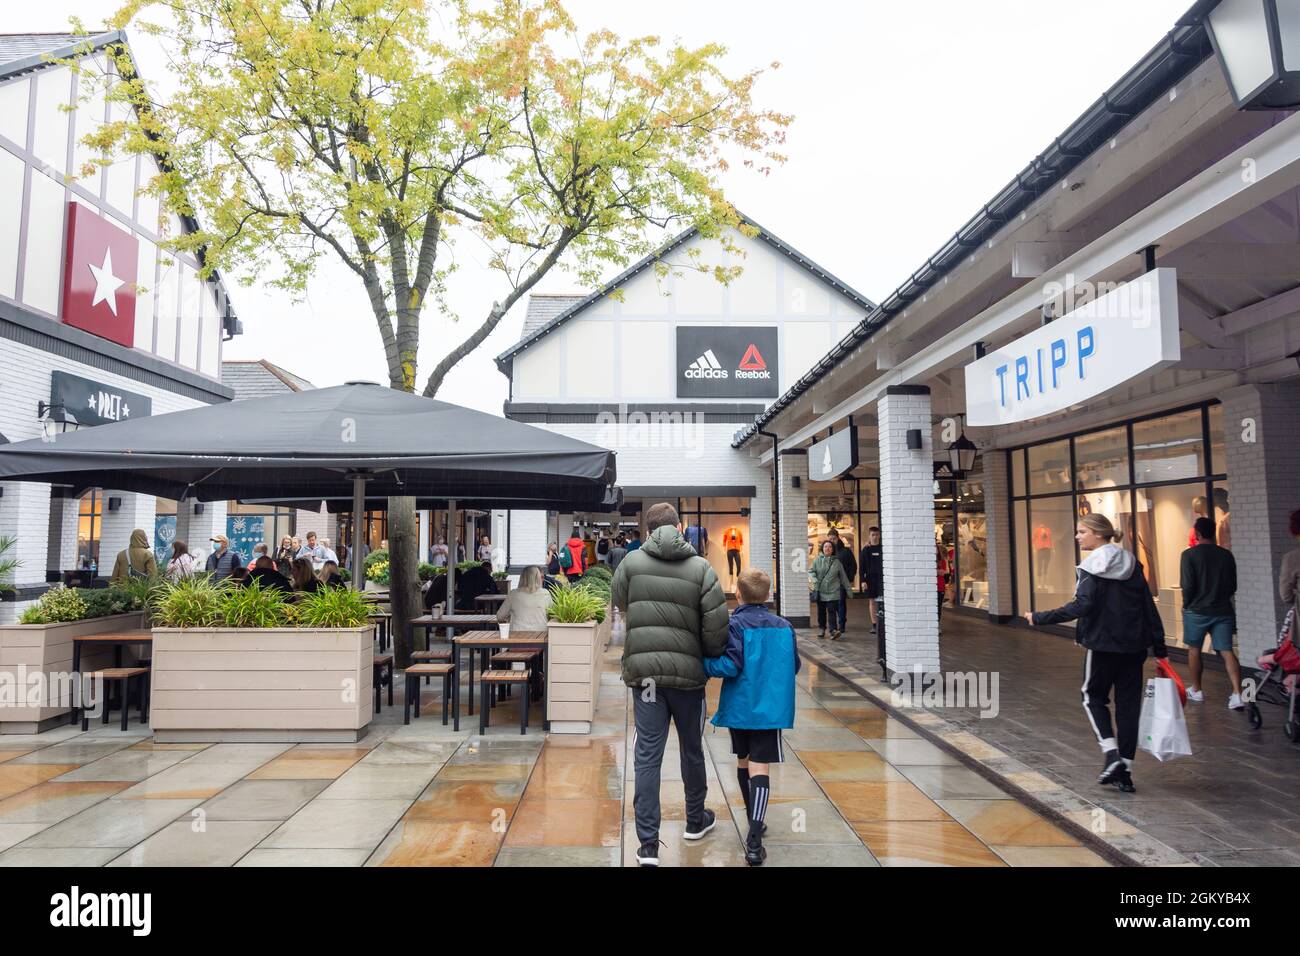 Cheshire Oaks Designer Outlet, Kinsey Road, Wirral, Merseyside, Angleterre, Royaume-Uni Banque D'Images